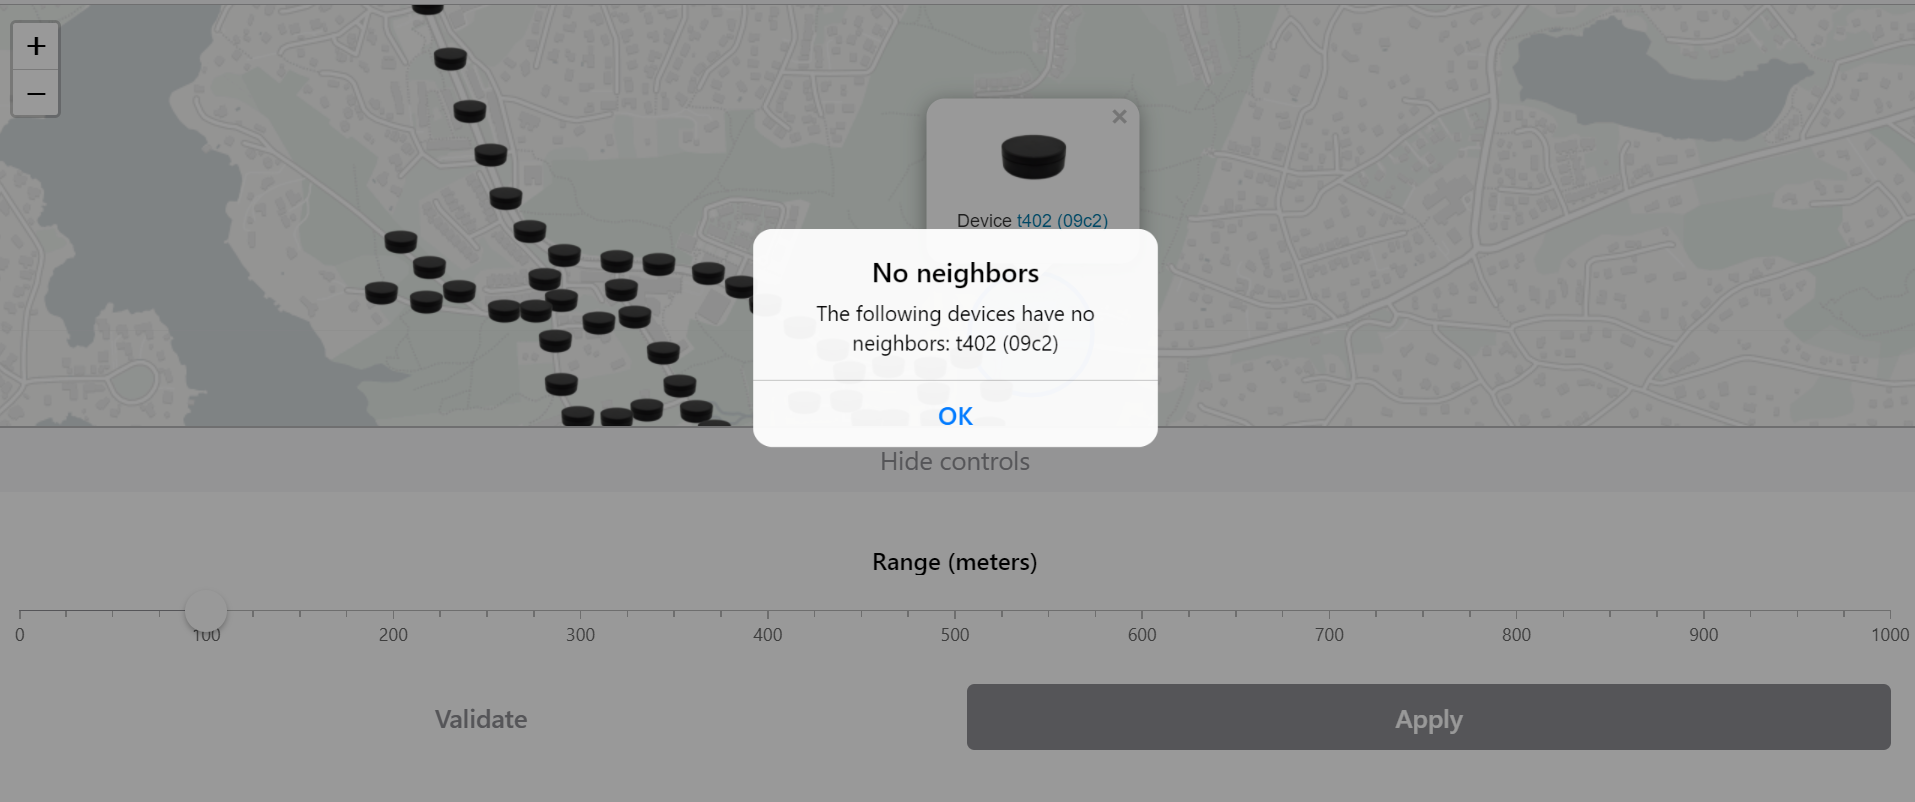 Devices are missing neighbors